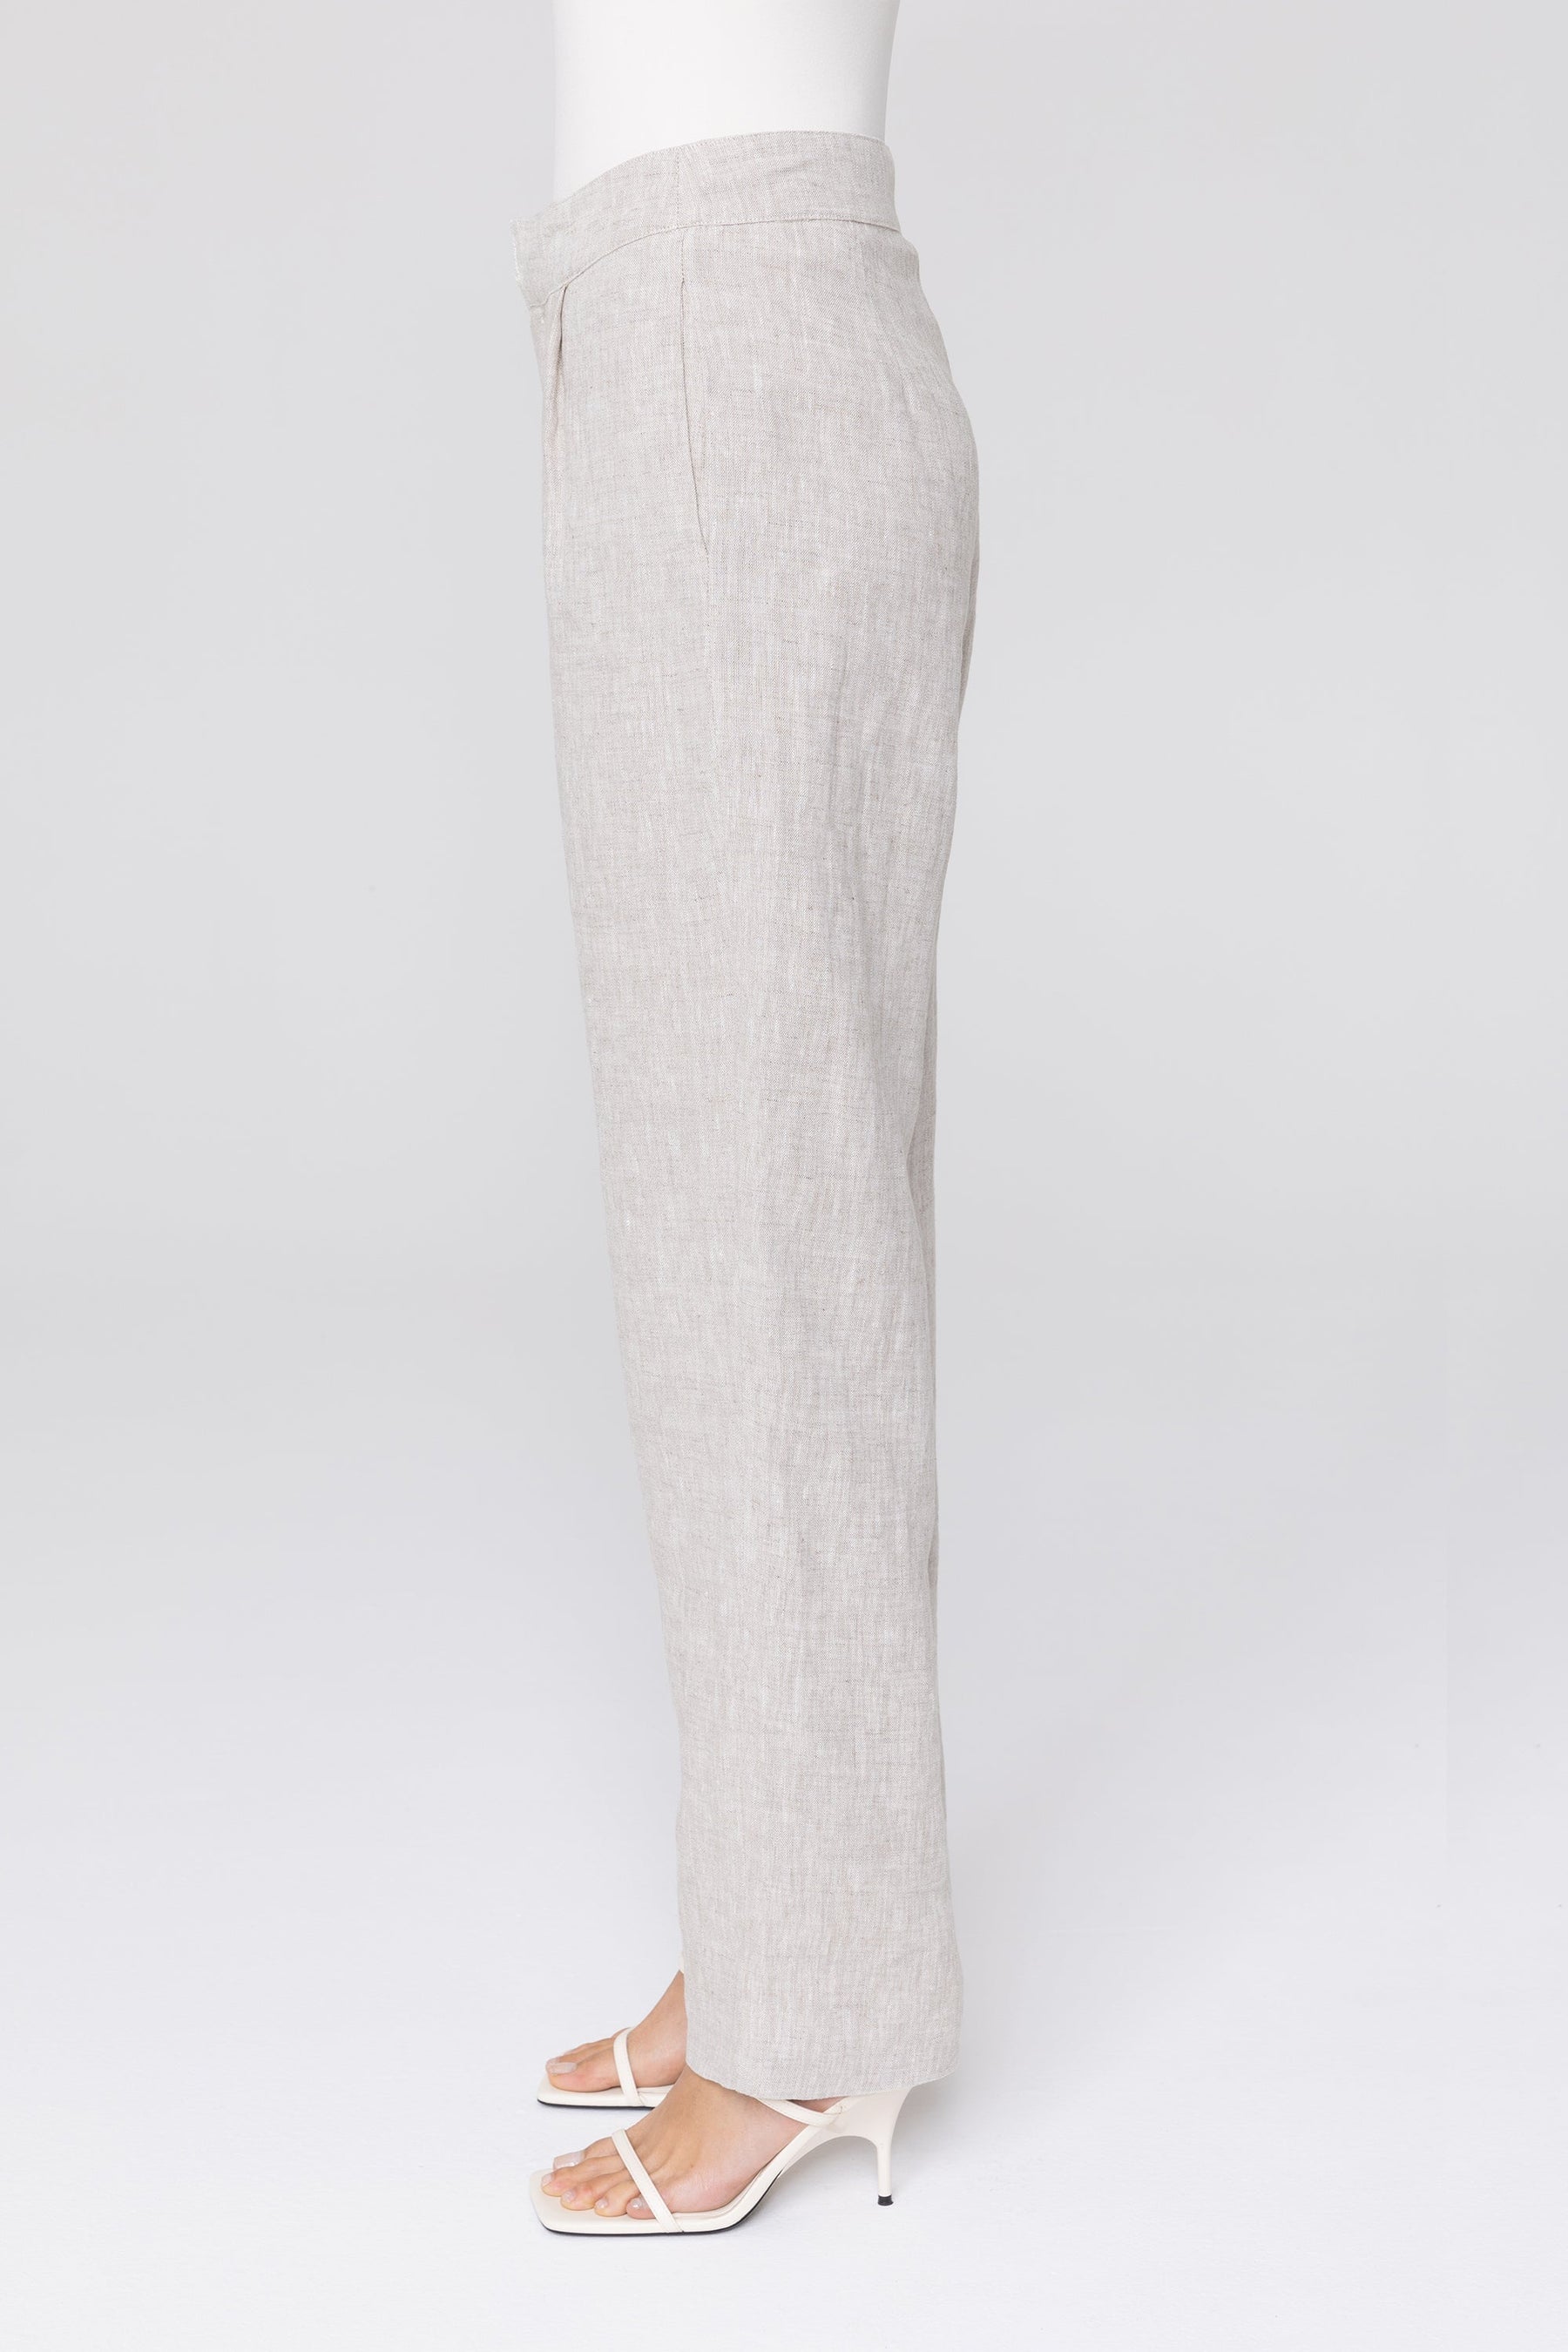 Linen Straight Leg Pants - Grey Taupe Veiled Collection 